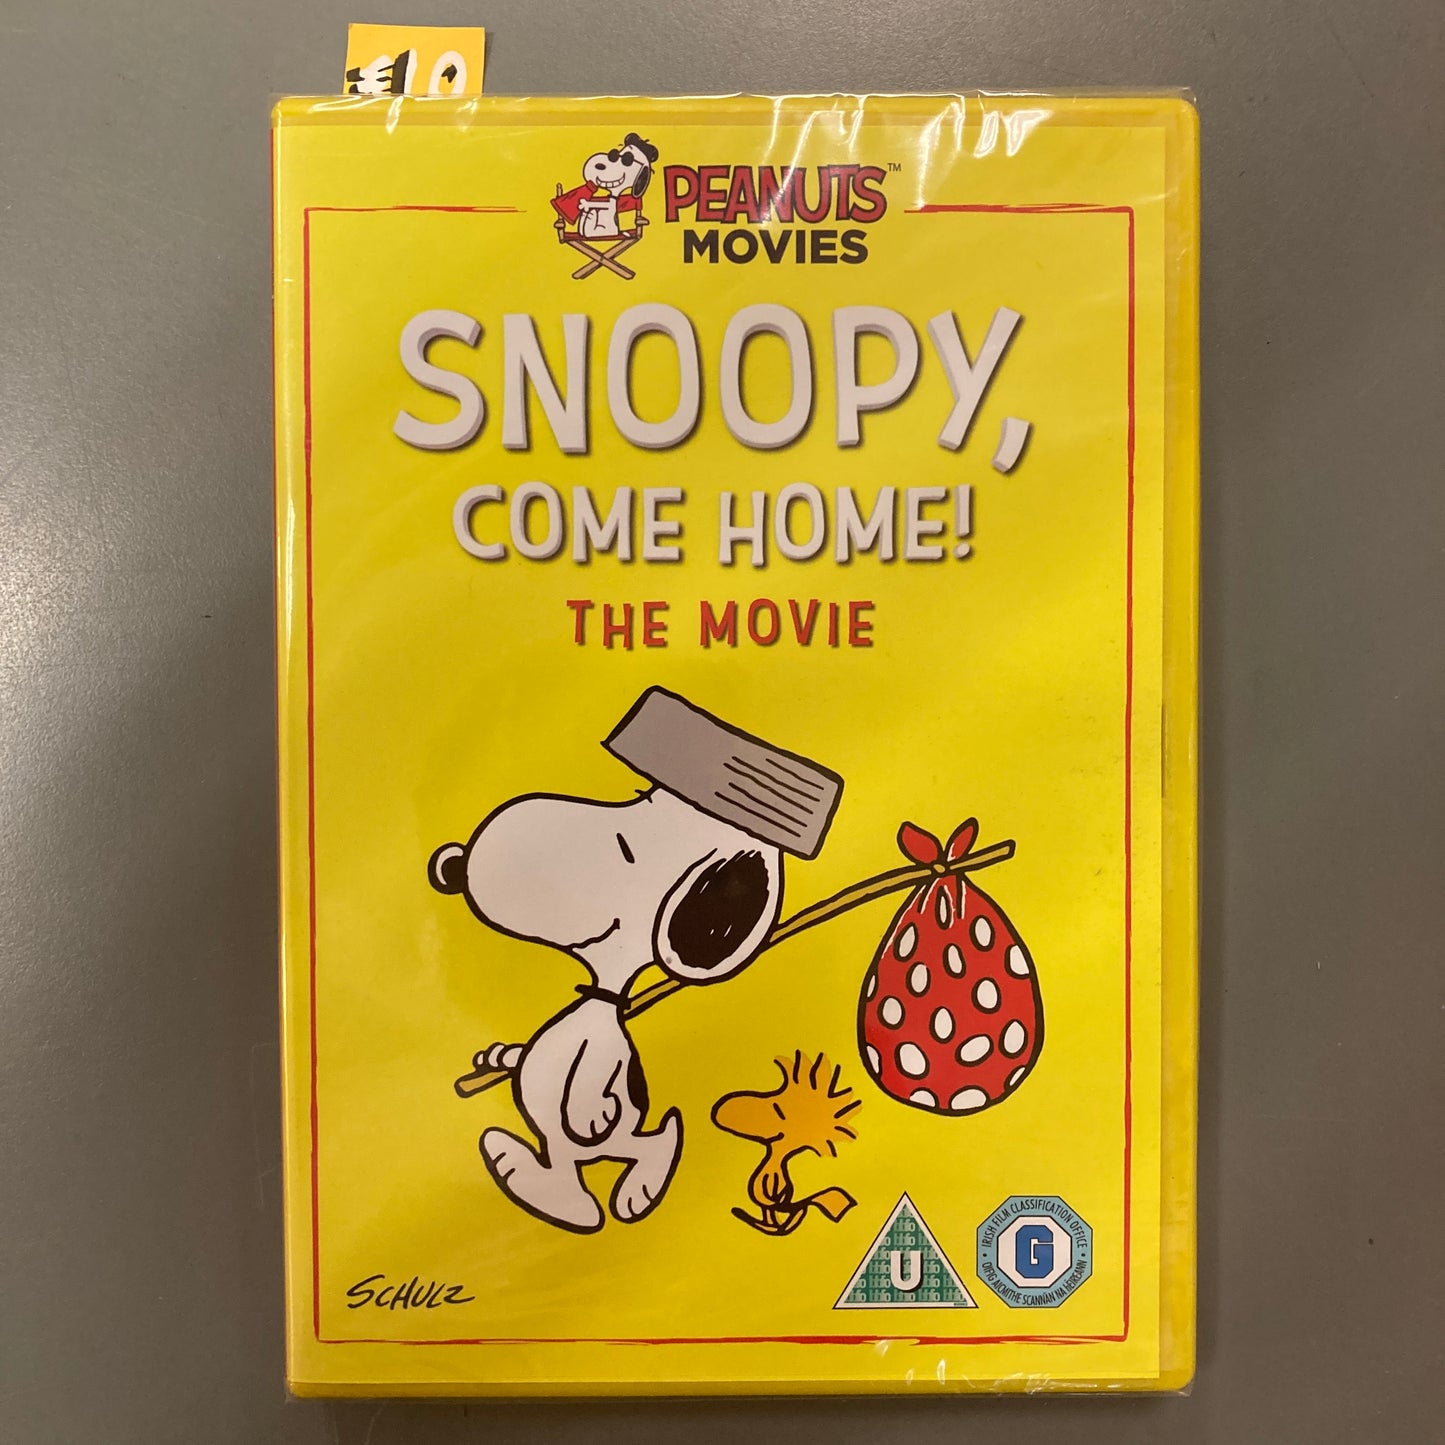 Snoopy, Come Home (DVD)